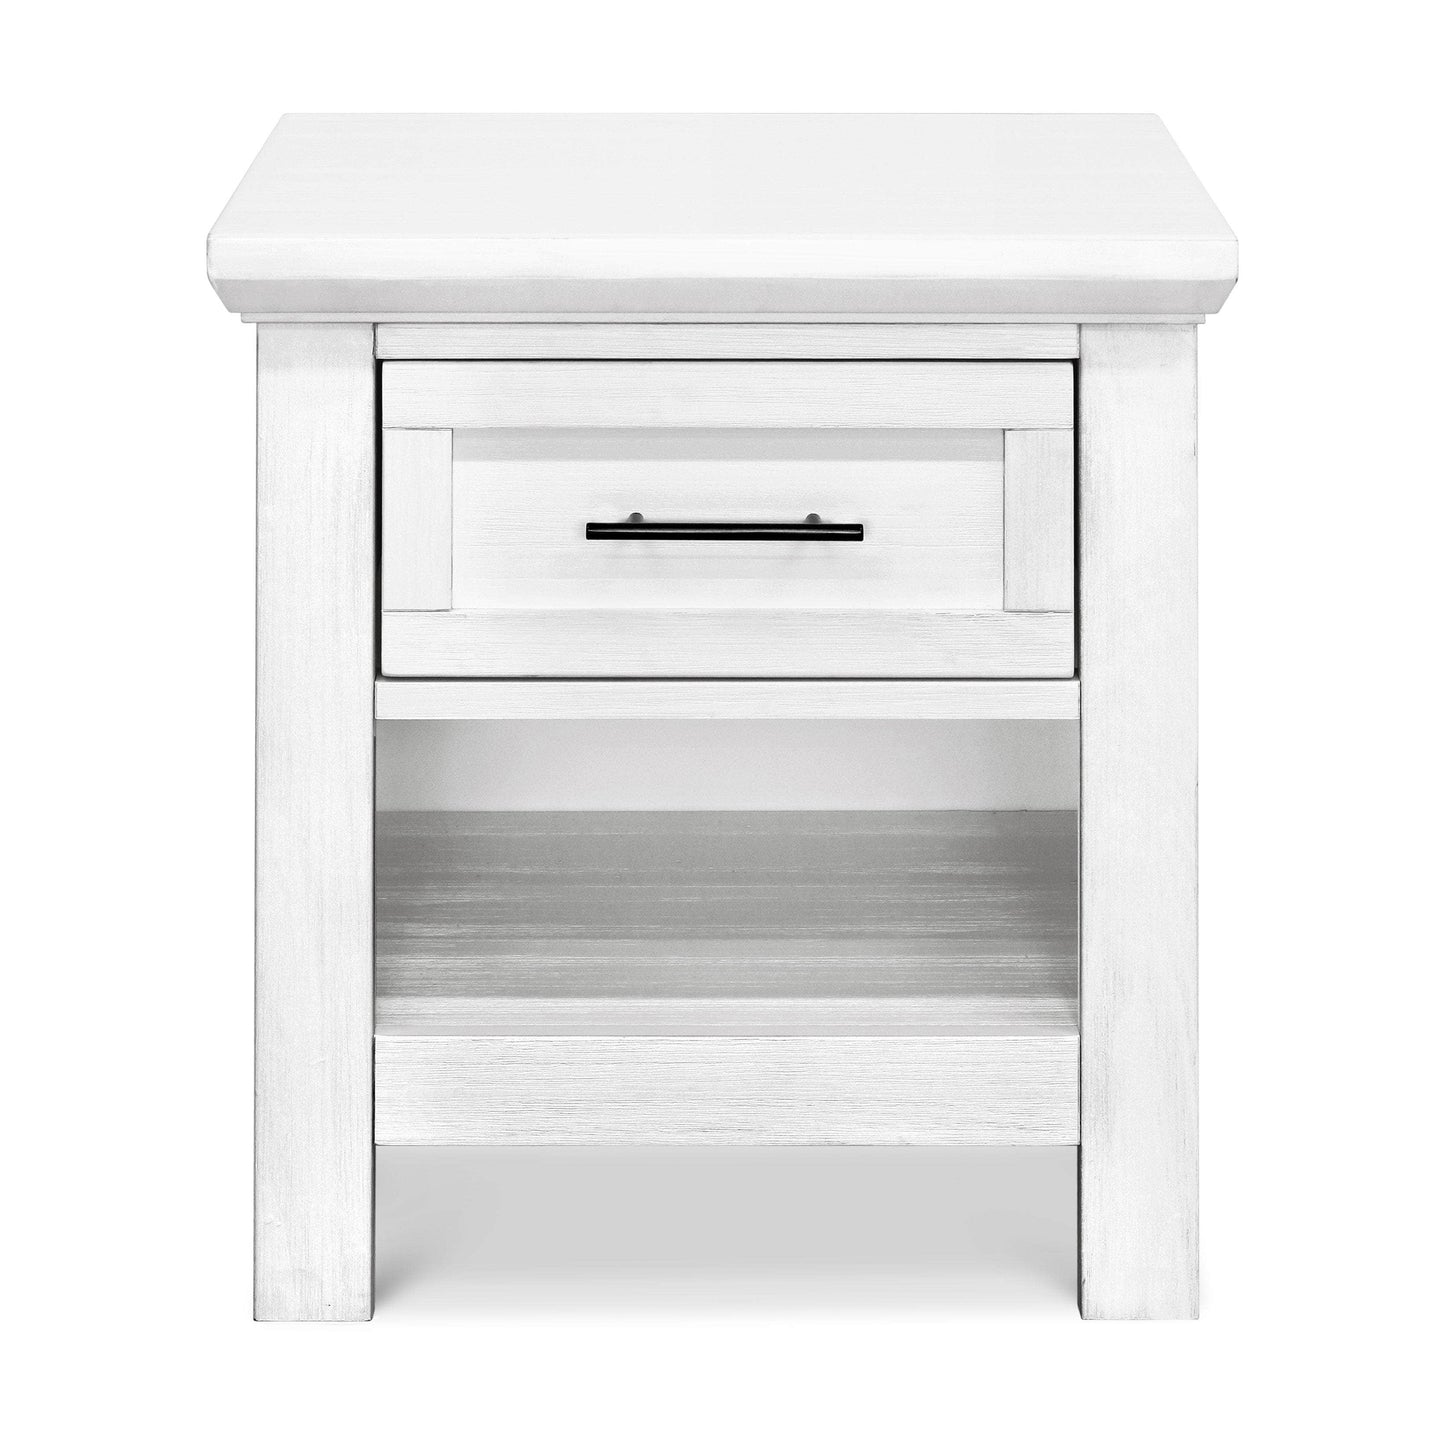 B14560LW,Emory Farmhouse Nightstand in Linen White